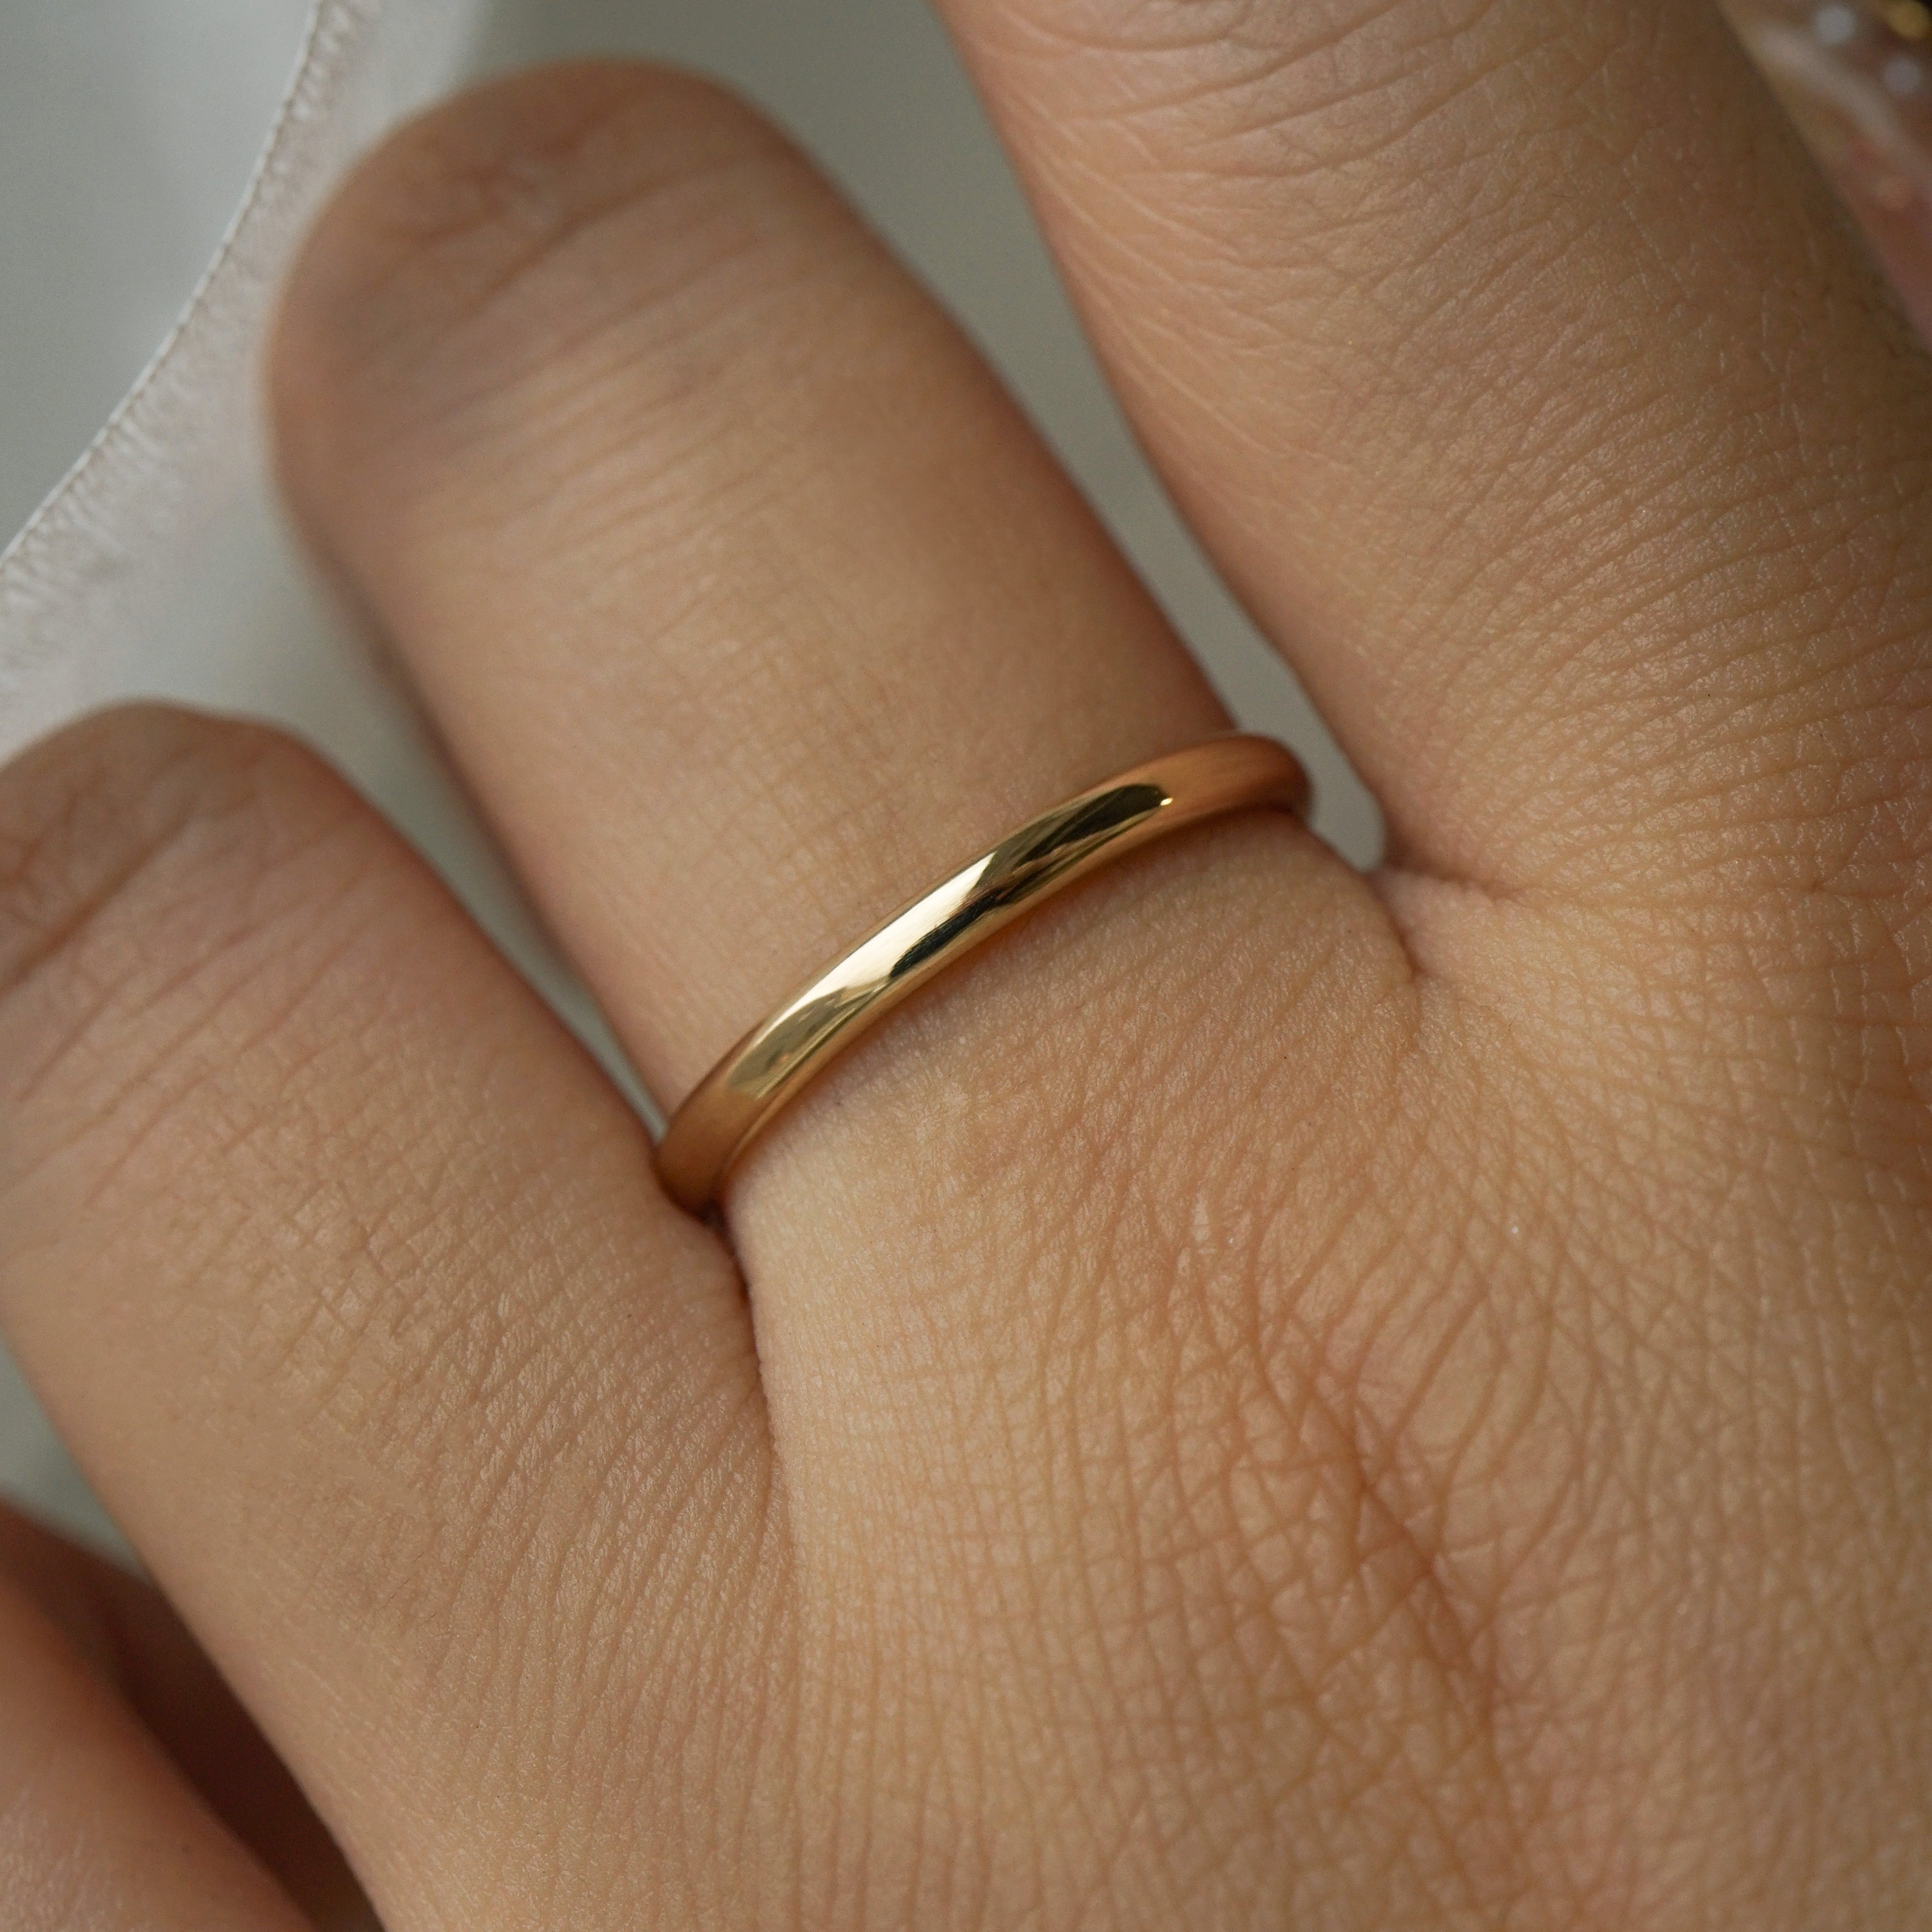 A stock photo of Laurie Fleming Jewellery's plain solid gold "Wisteria" band, a 2mm wide stacking ring/wedding band, handmade in Toronto. The ring is worn on a hand with a light grey background.